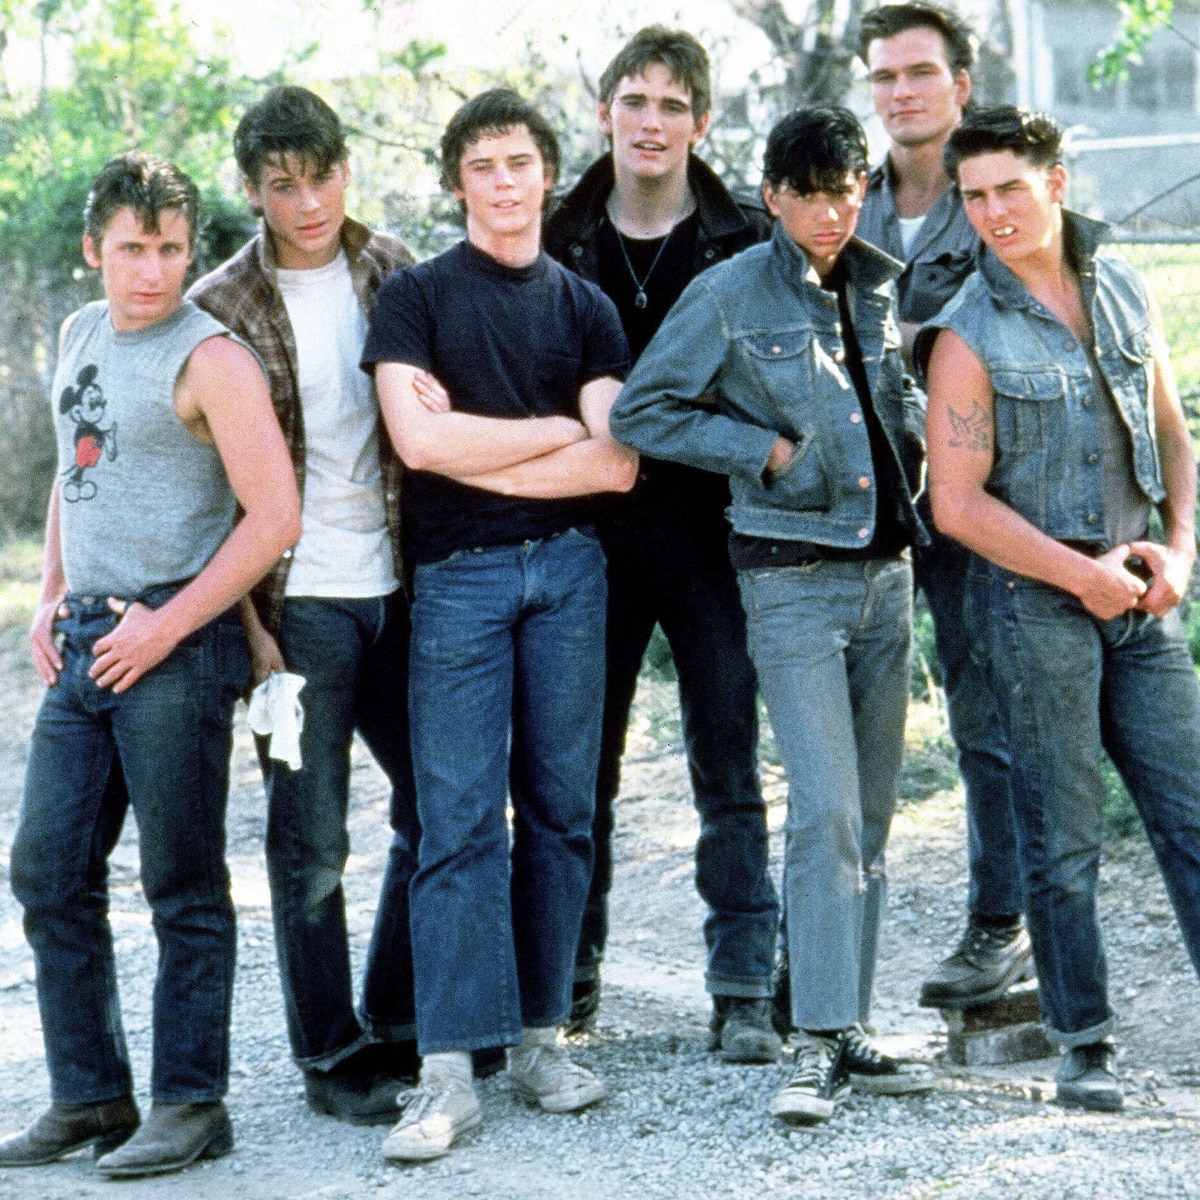 [https://akns-images.eonline.com/eol_images/Entire_Site/2021223/rs_1200x1200-210323151338-1200.2the-outsiders-then-now.jpg?fit/u003daround%7C1200:1200/u0026output-quality/u003d90/u0026crop/u003d1200:1200